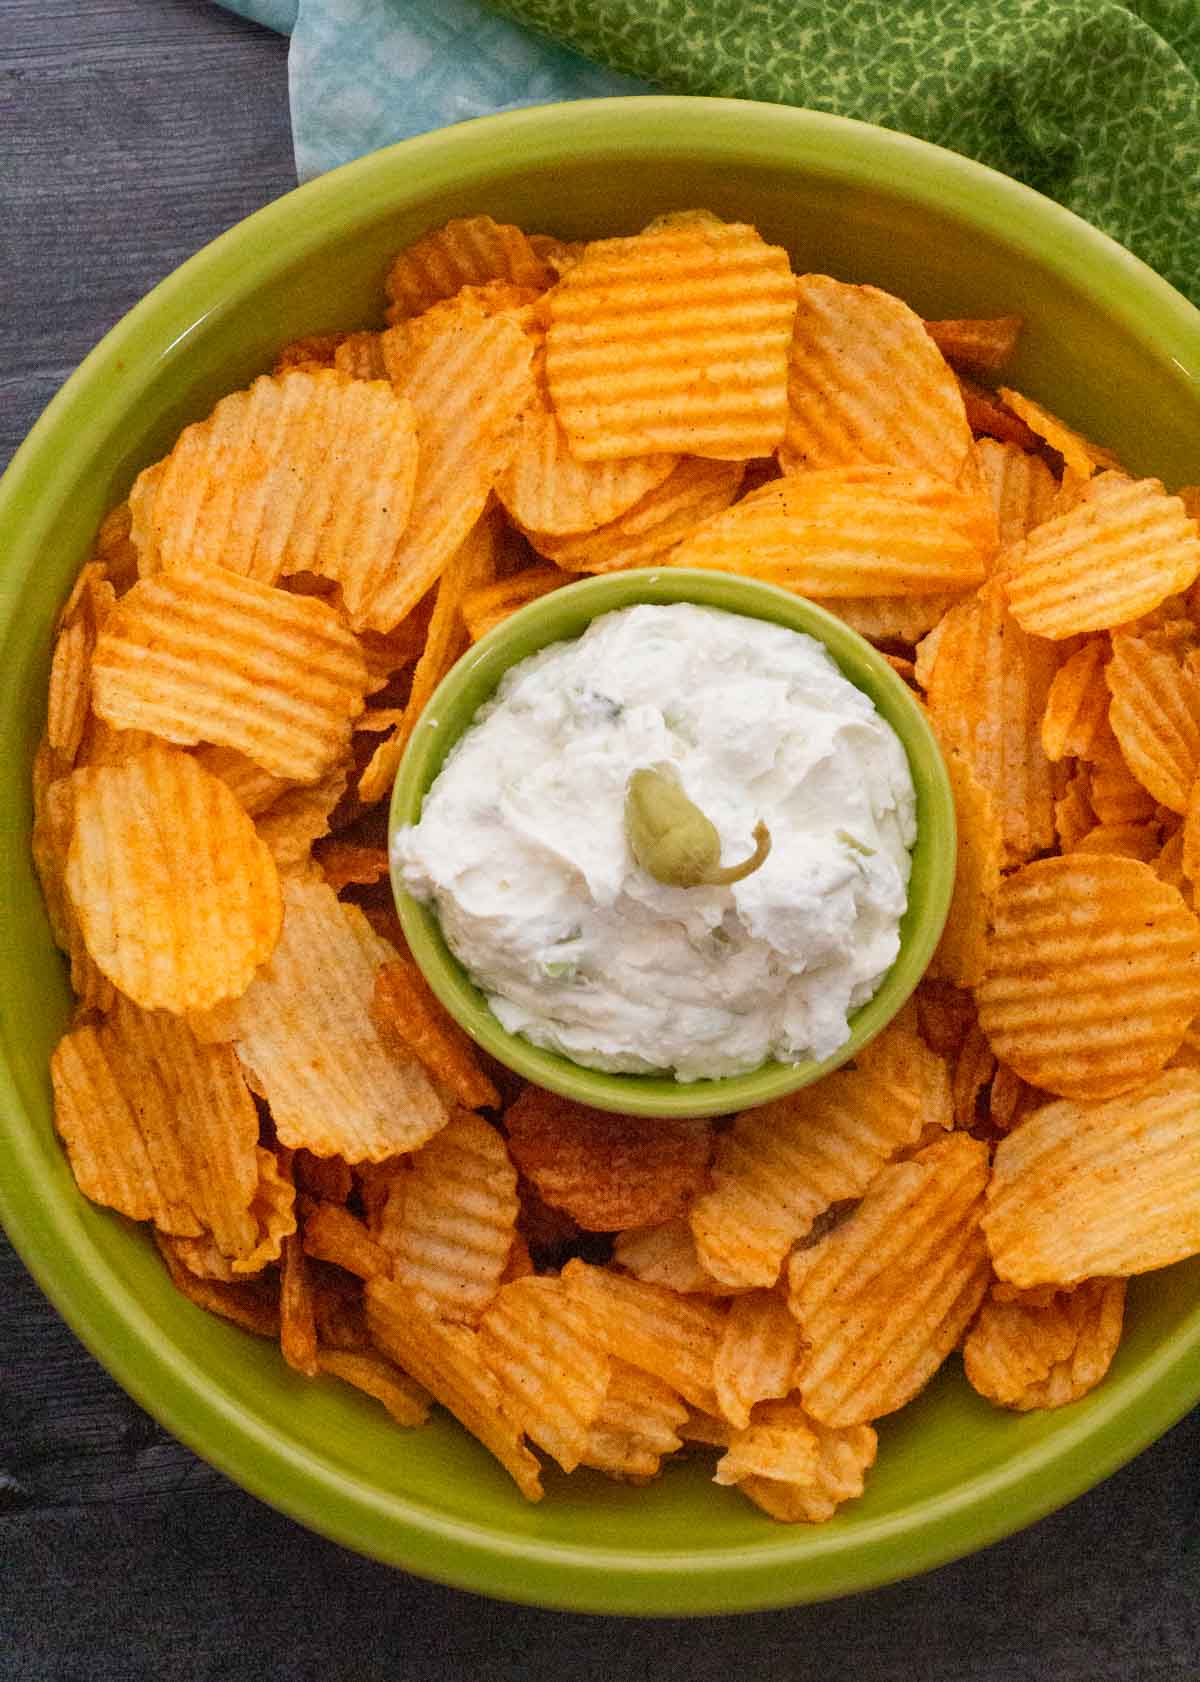 Whipped feta dip with bbq potato chips in a green serving bowl.